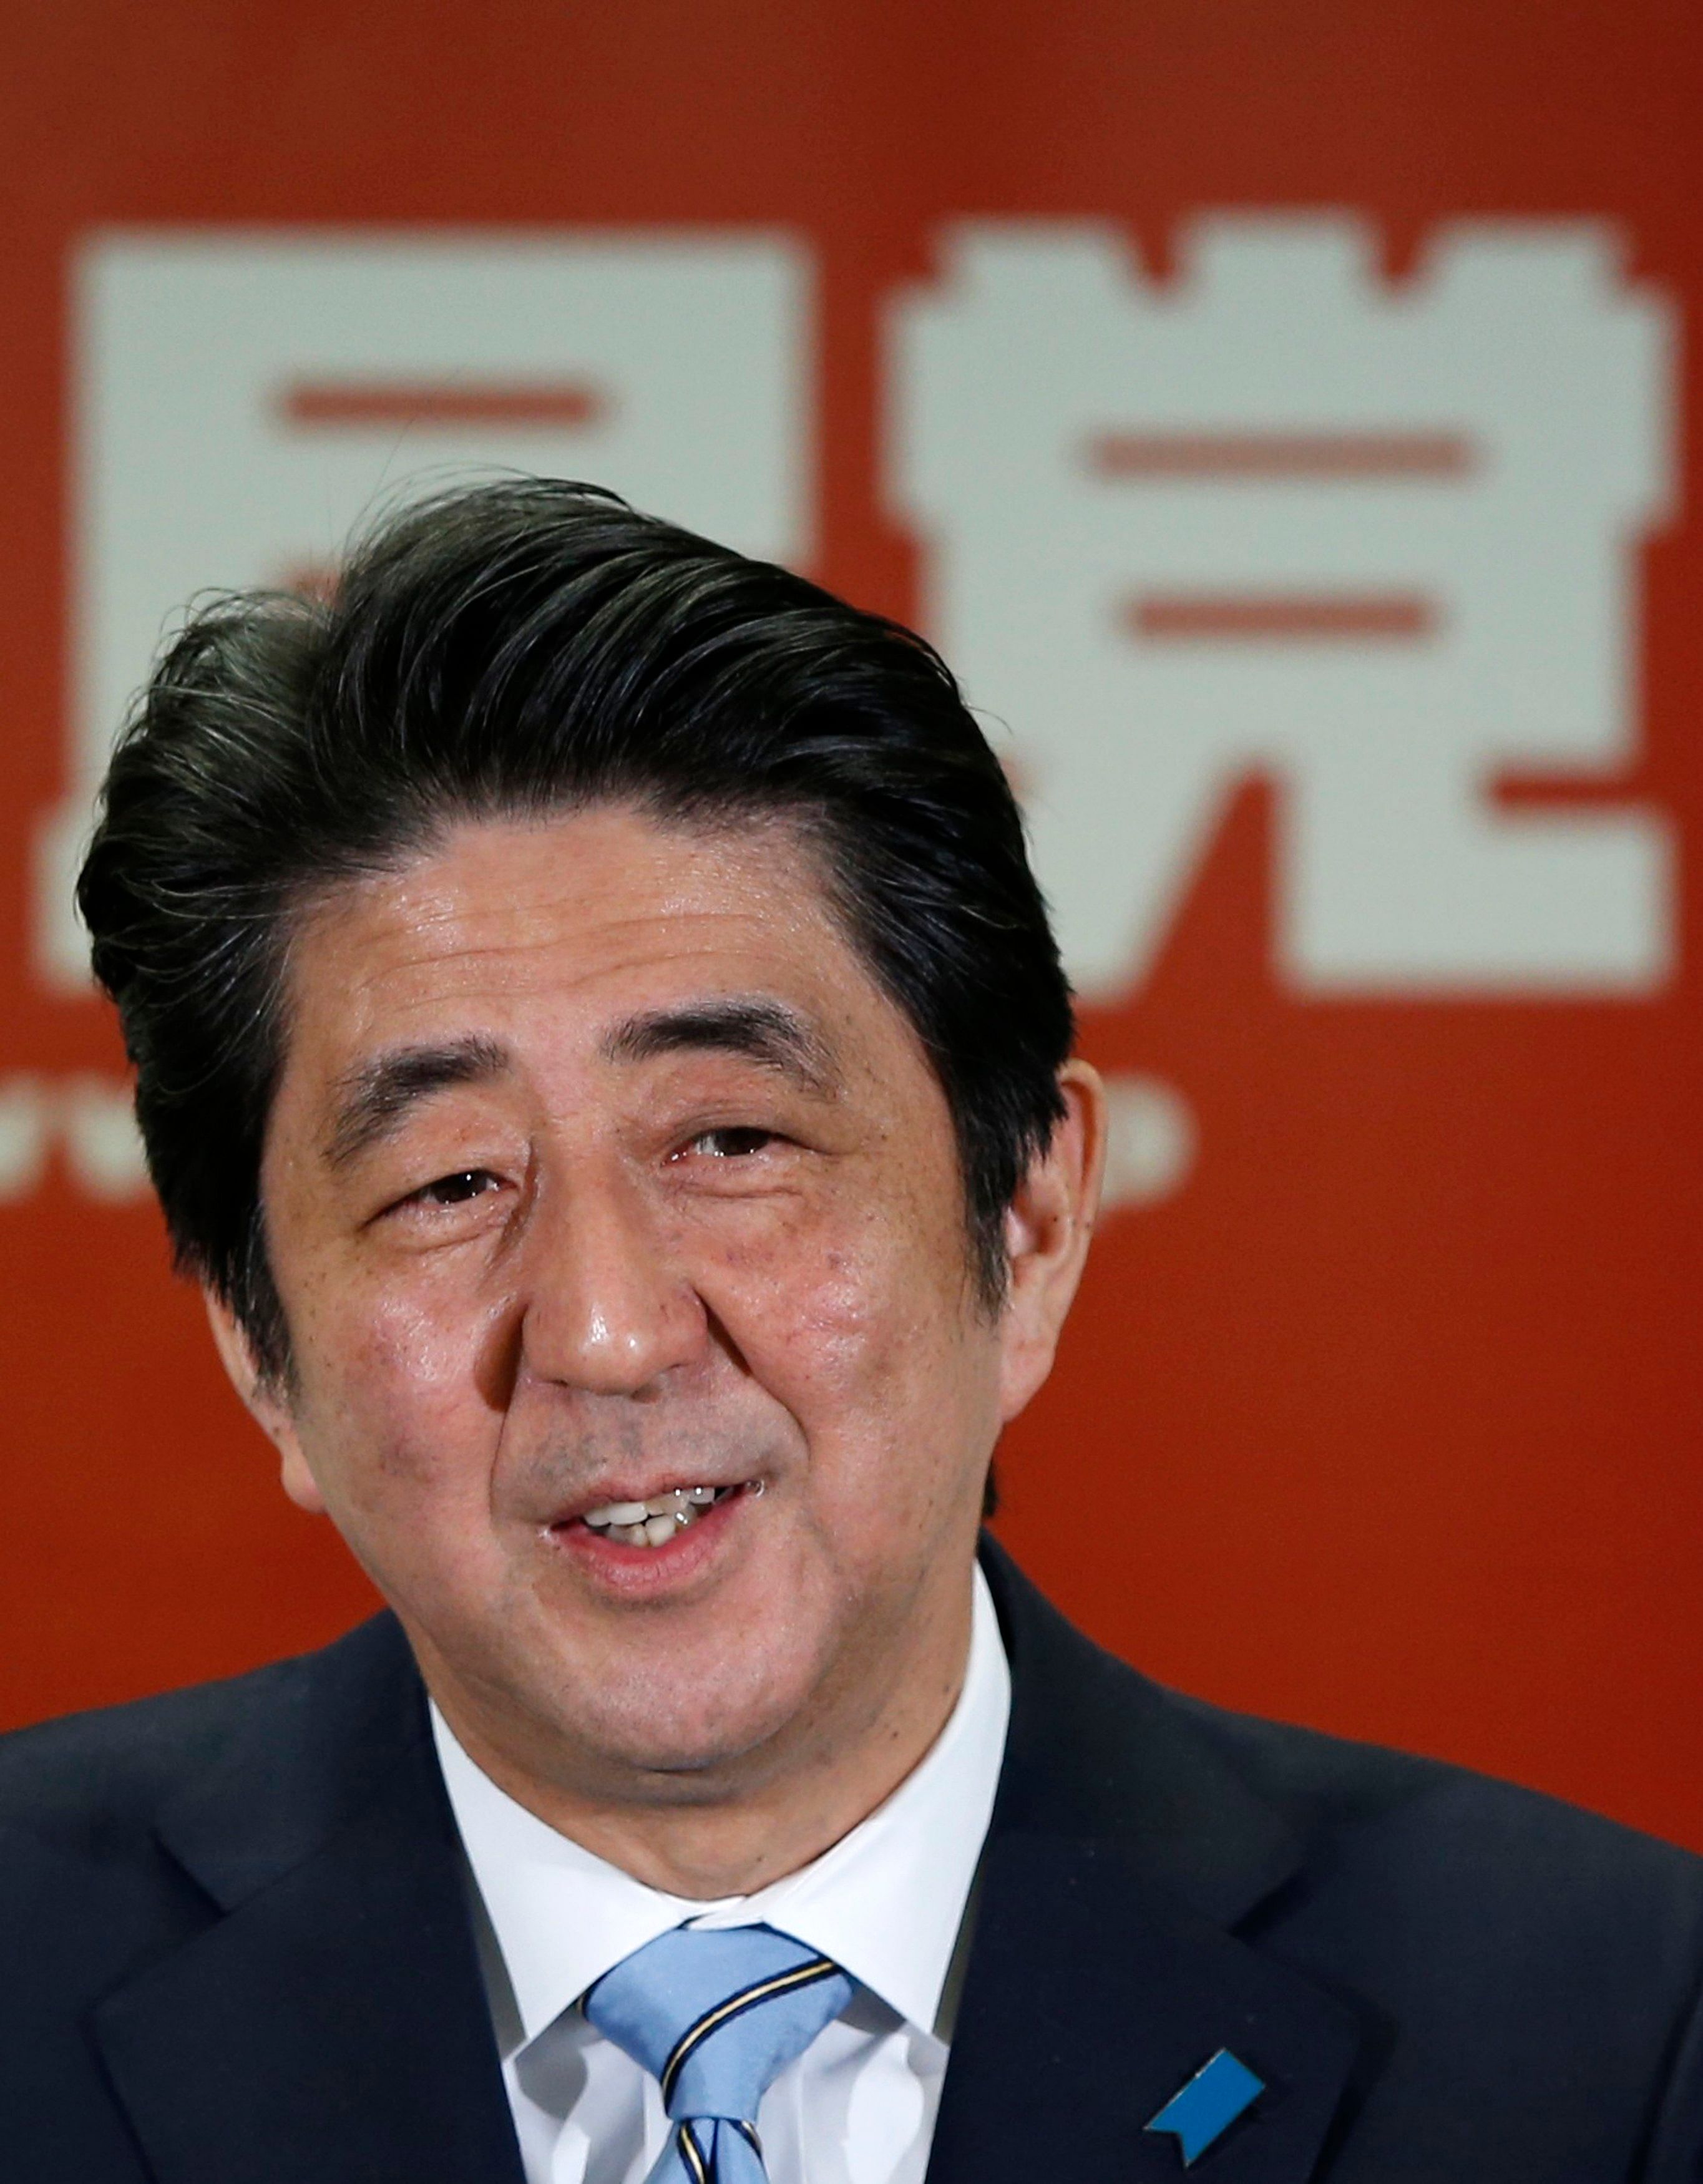 Japan's Prime Minister and the leader of the ruling Liberal Democratic Party (LDP) Shinzo Abe smiles during a news conference following a victory in the lower house elections by his ruling coalition, at the LDP headquarters in Tokyo December 15, 2014. Photo: Reuters